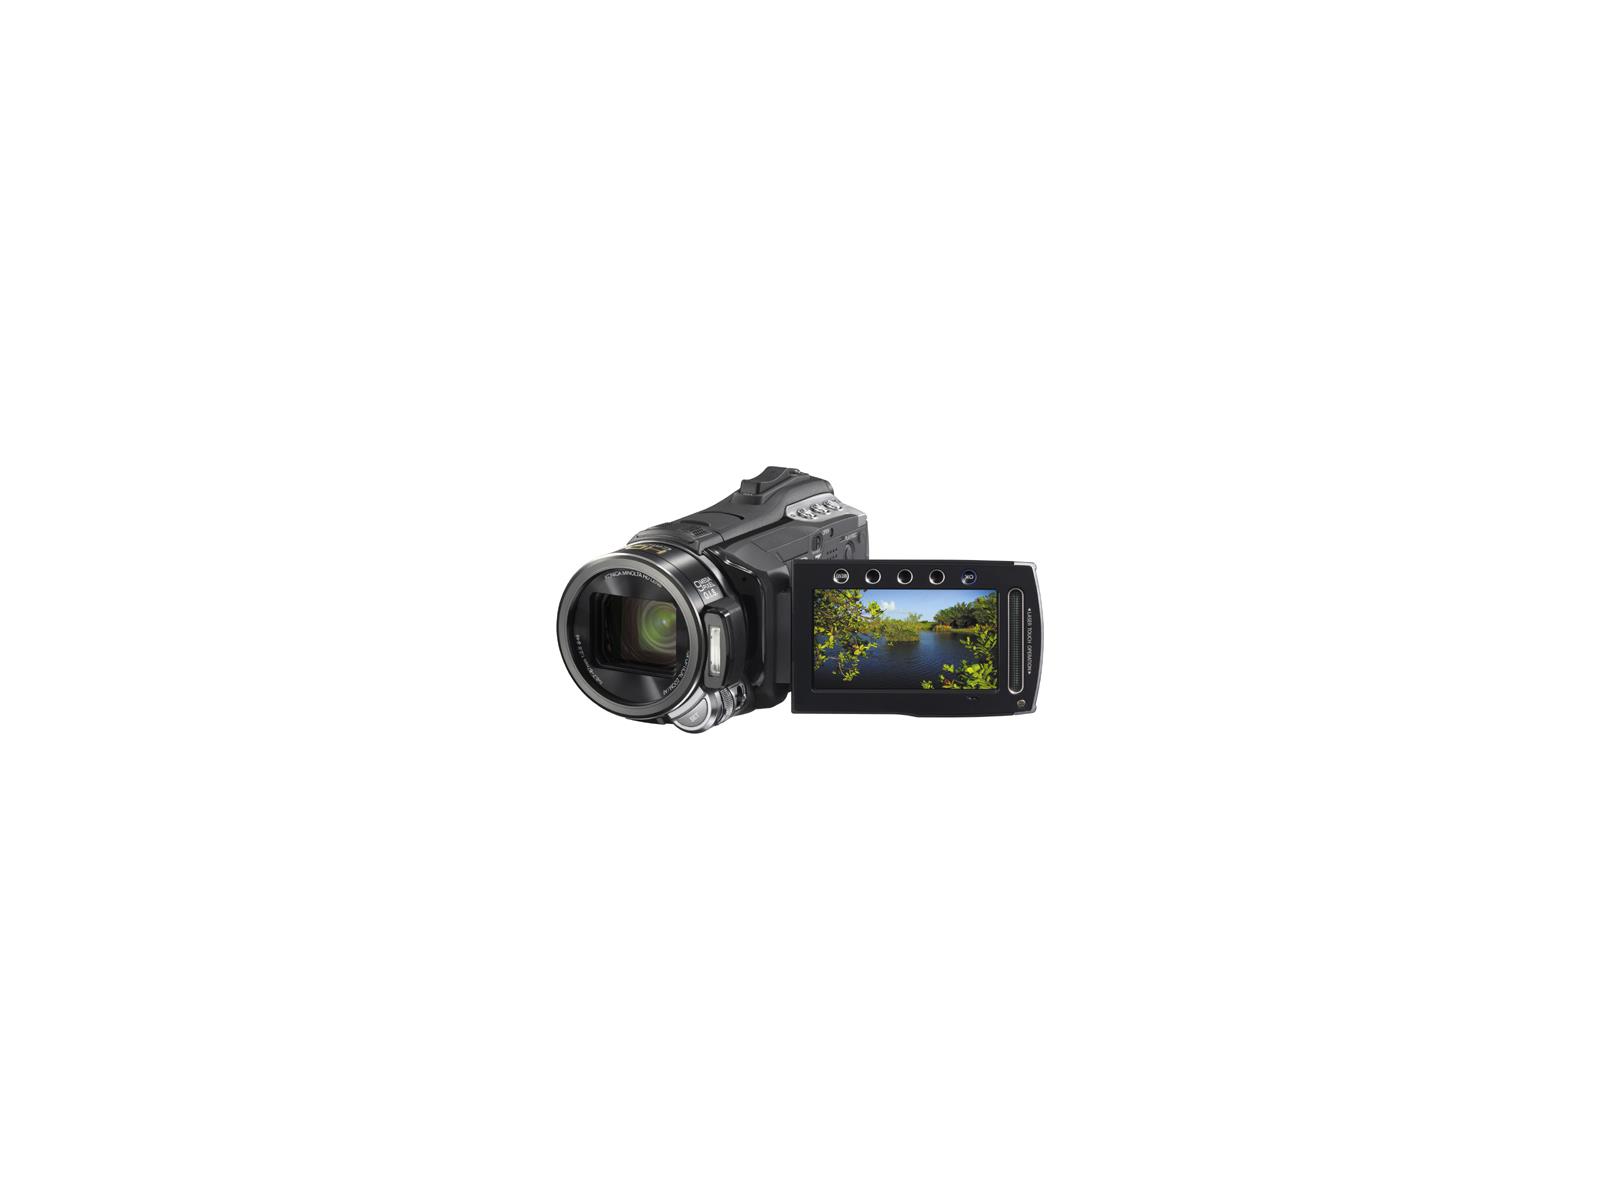 JVC Ships HD Everio GZ-HM400 Camcorder For $999.95 | HotHardware